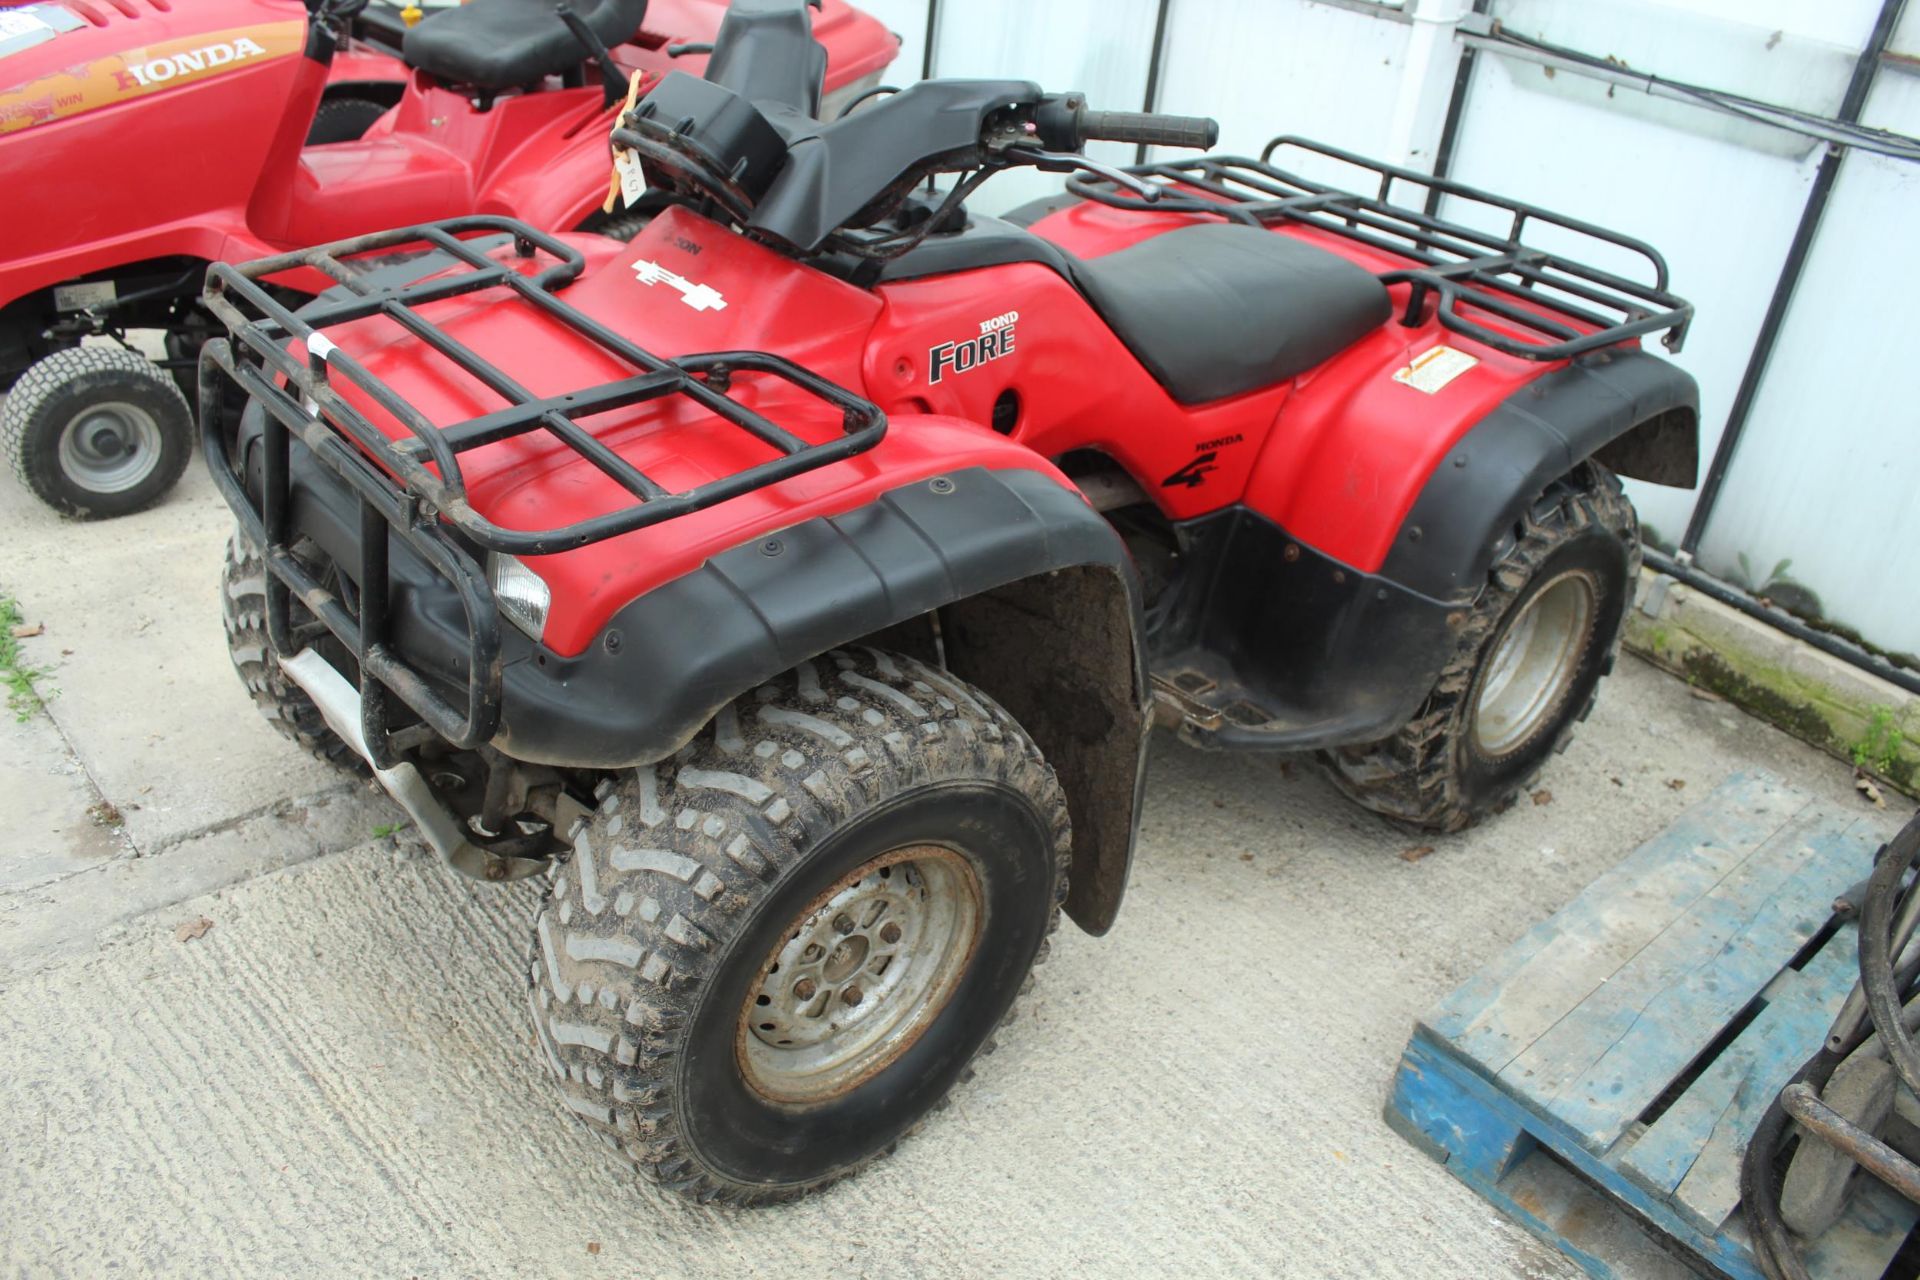 HONDA FOREMAN 400 QUAD , RUNS AND DRIVES, WORKING LIGHTS, GOOD TYRES, STARTS ON KEY. KEY IN OFFICE +